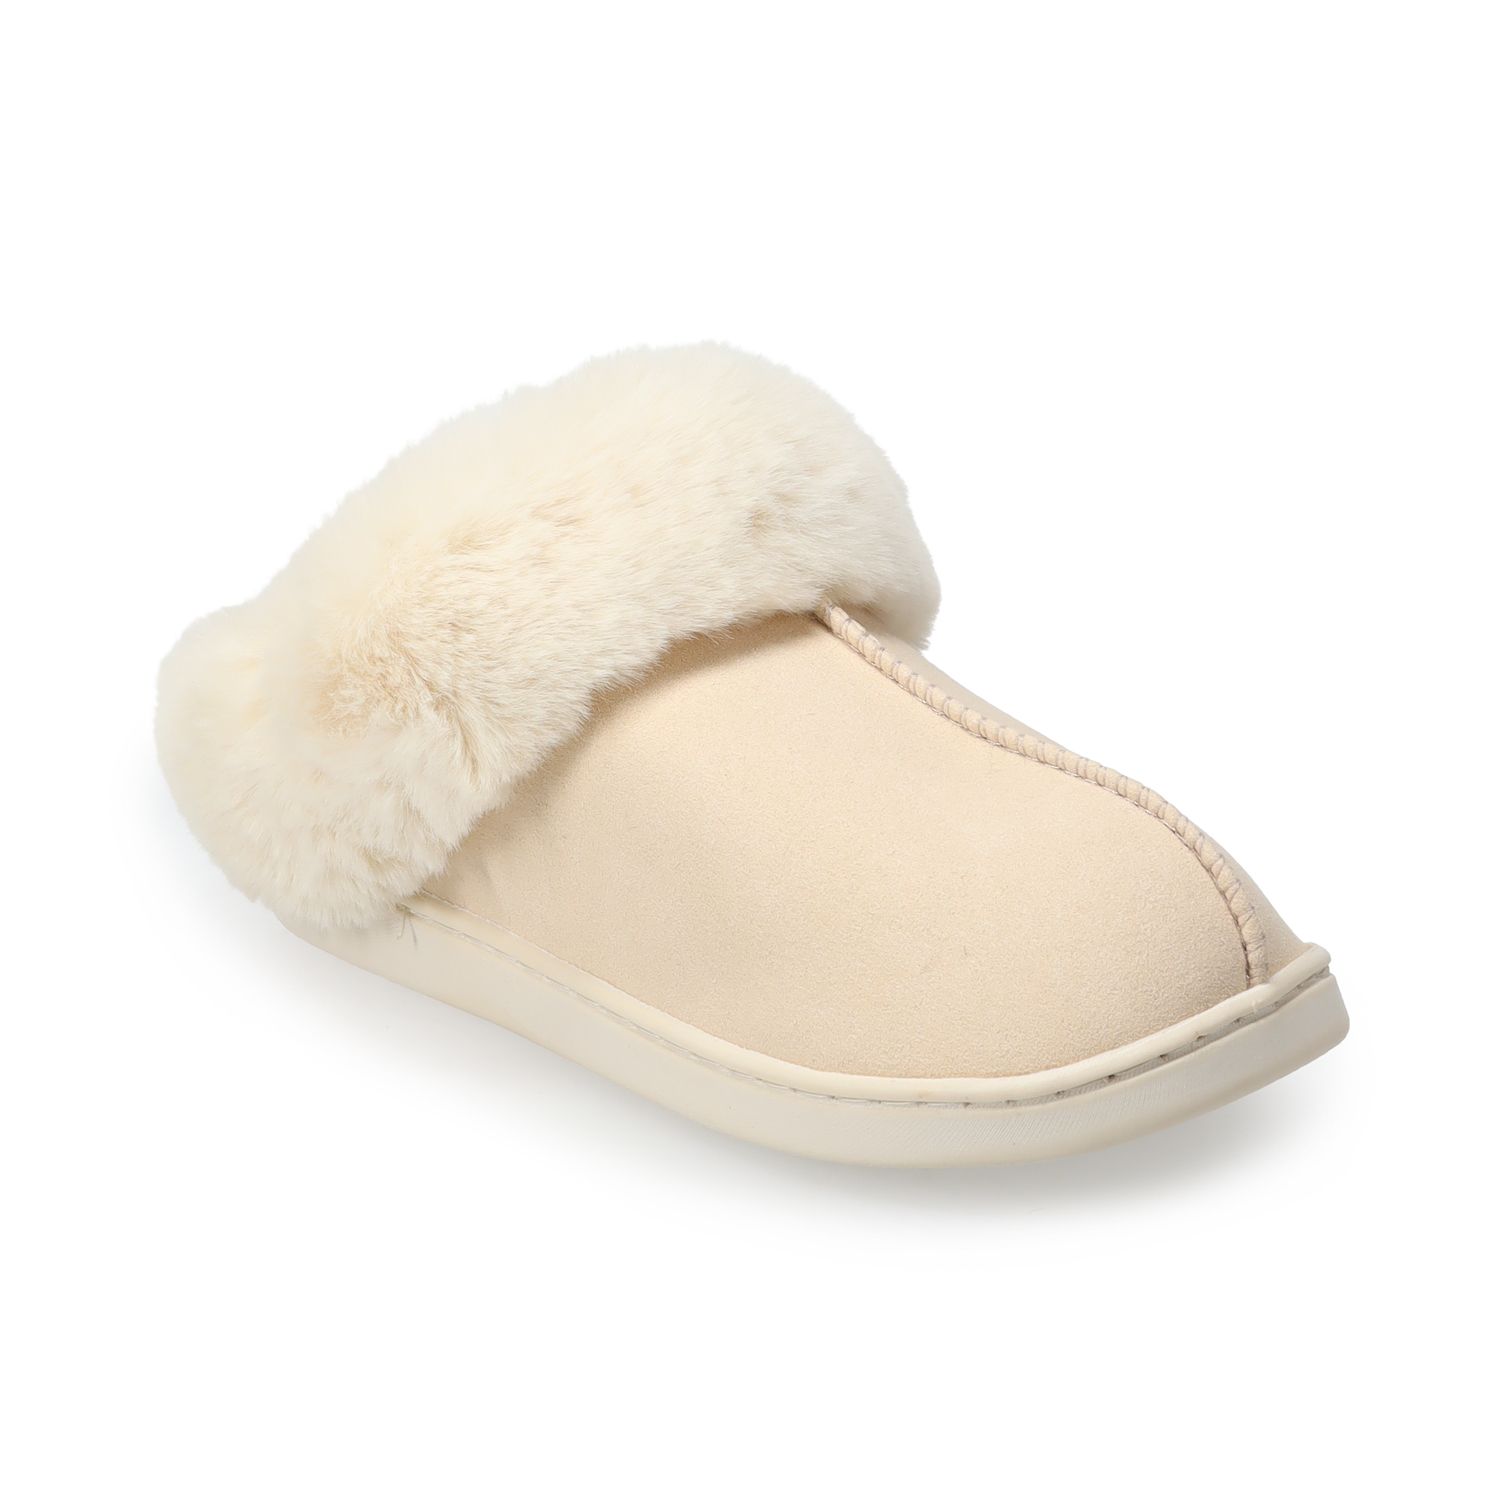 Image for LC Lauren Conrad Women's Faux Fur Clog Slippers at Kohl's.